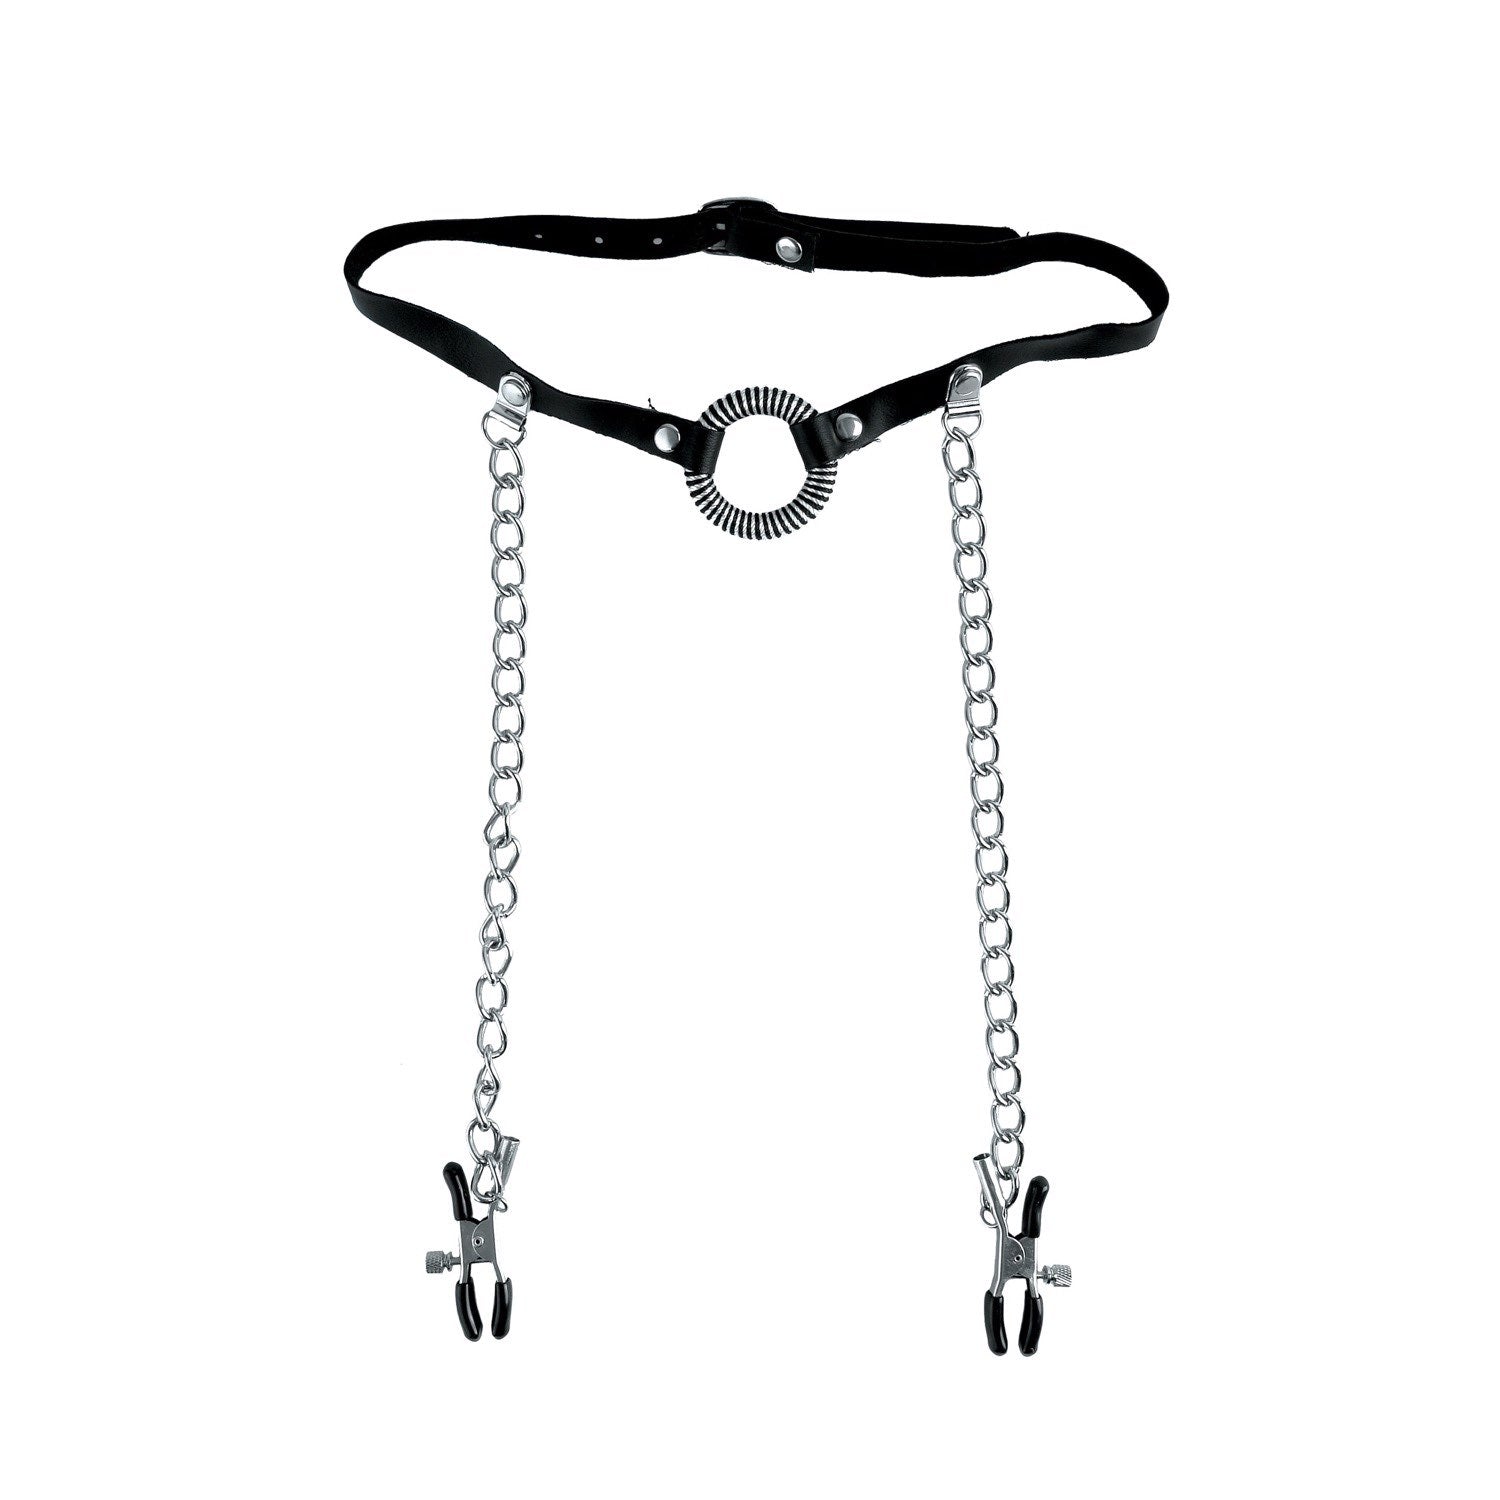 Fetish Fantasy Series Limited Edition O-ring Gag &amp; Nipple Clamps - Mouth and Nipple Restraints by Pipedream